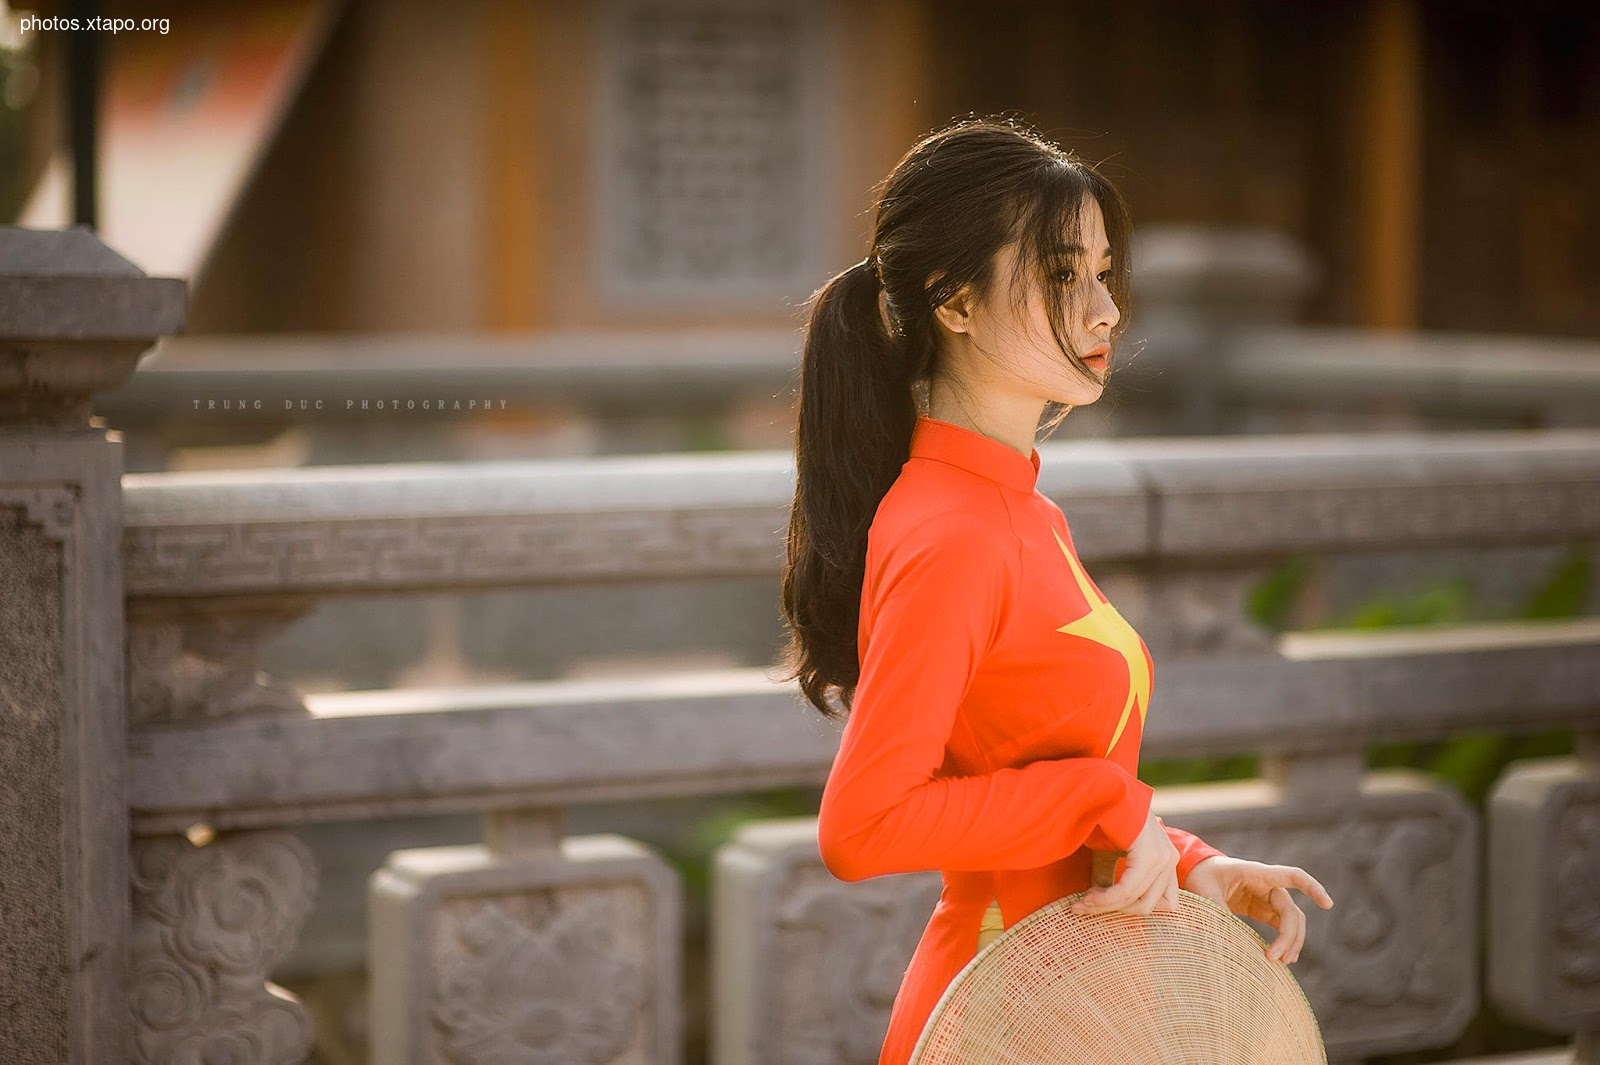 Nguyen Linh Anh,